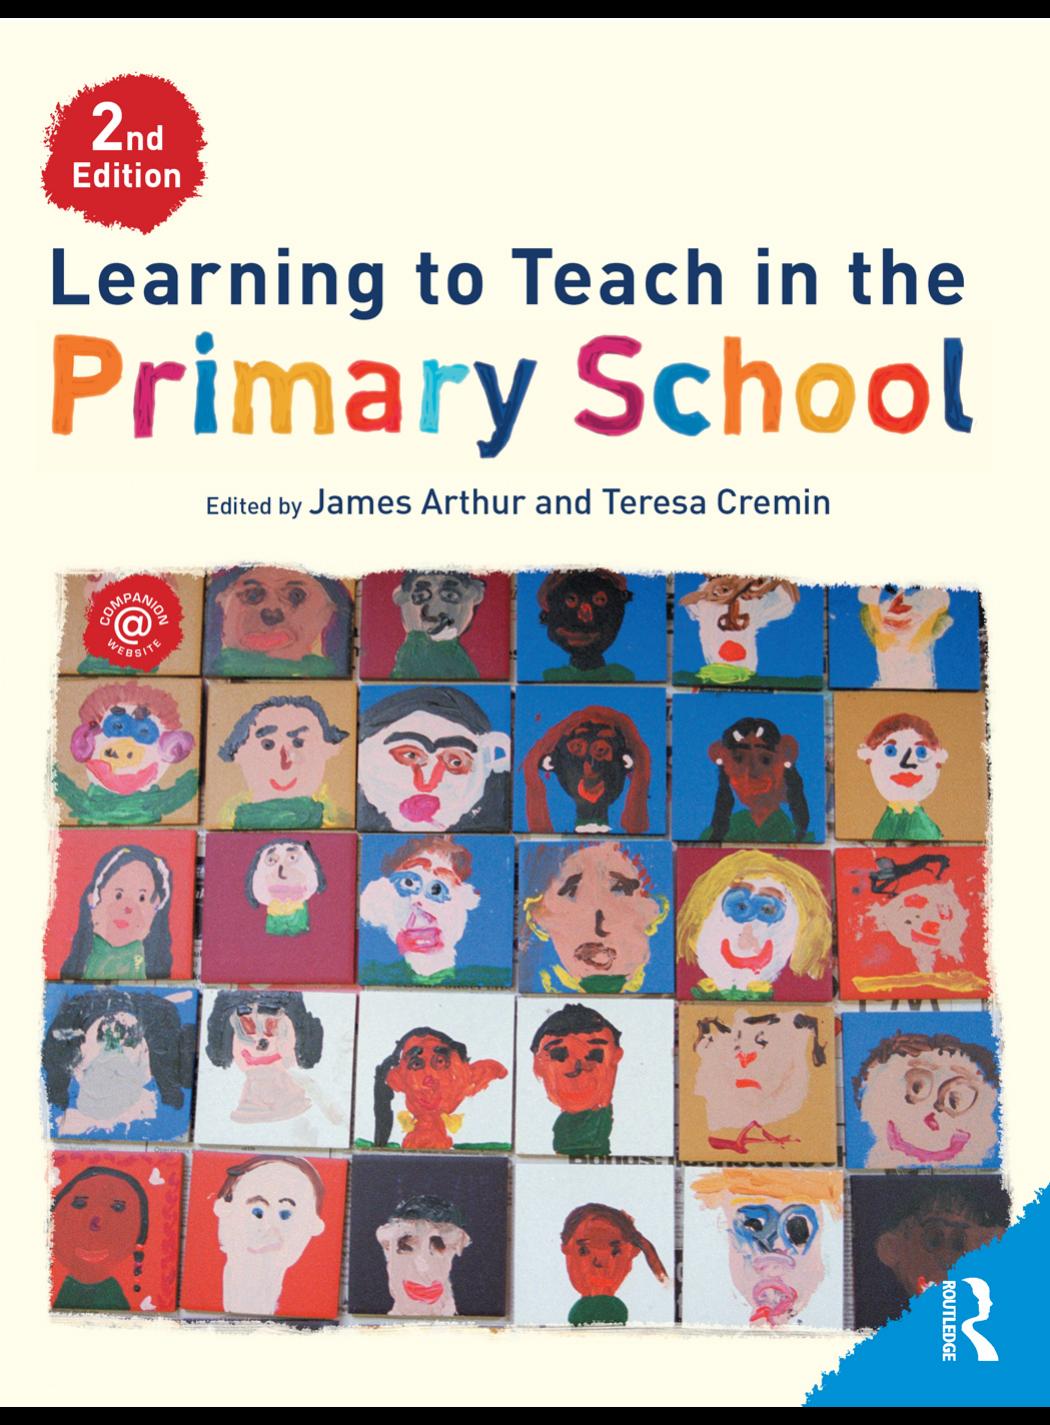 Learning to Teach in the Primary School, 2nd Edition